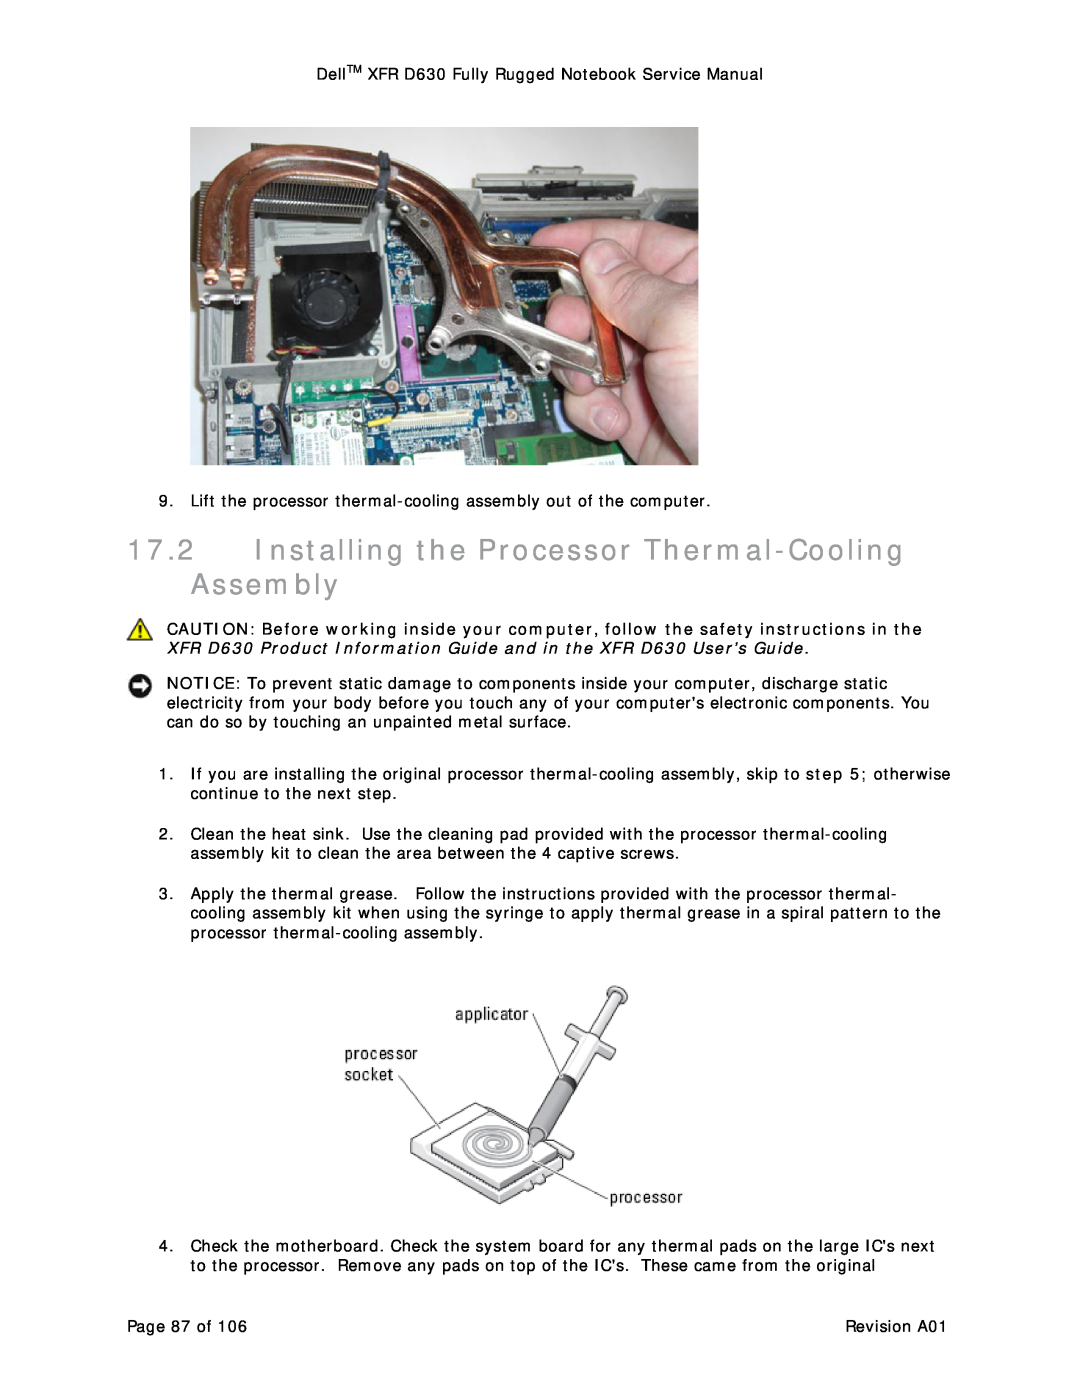 Dell D630 service manual Installing the Processor Thermal-Cooling Assembly 